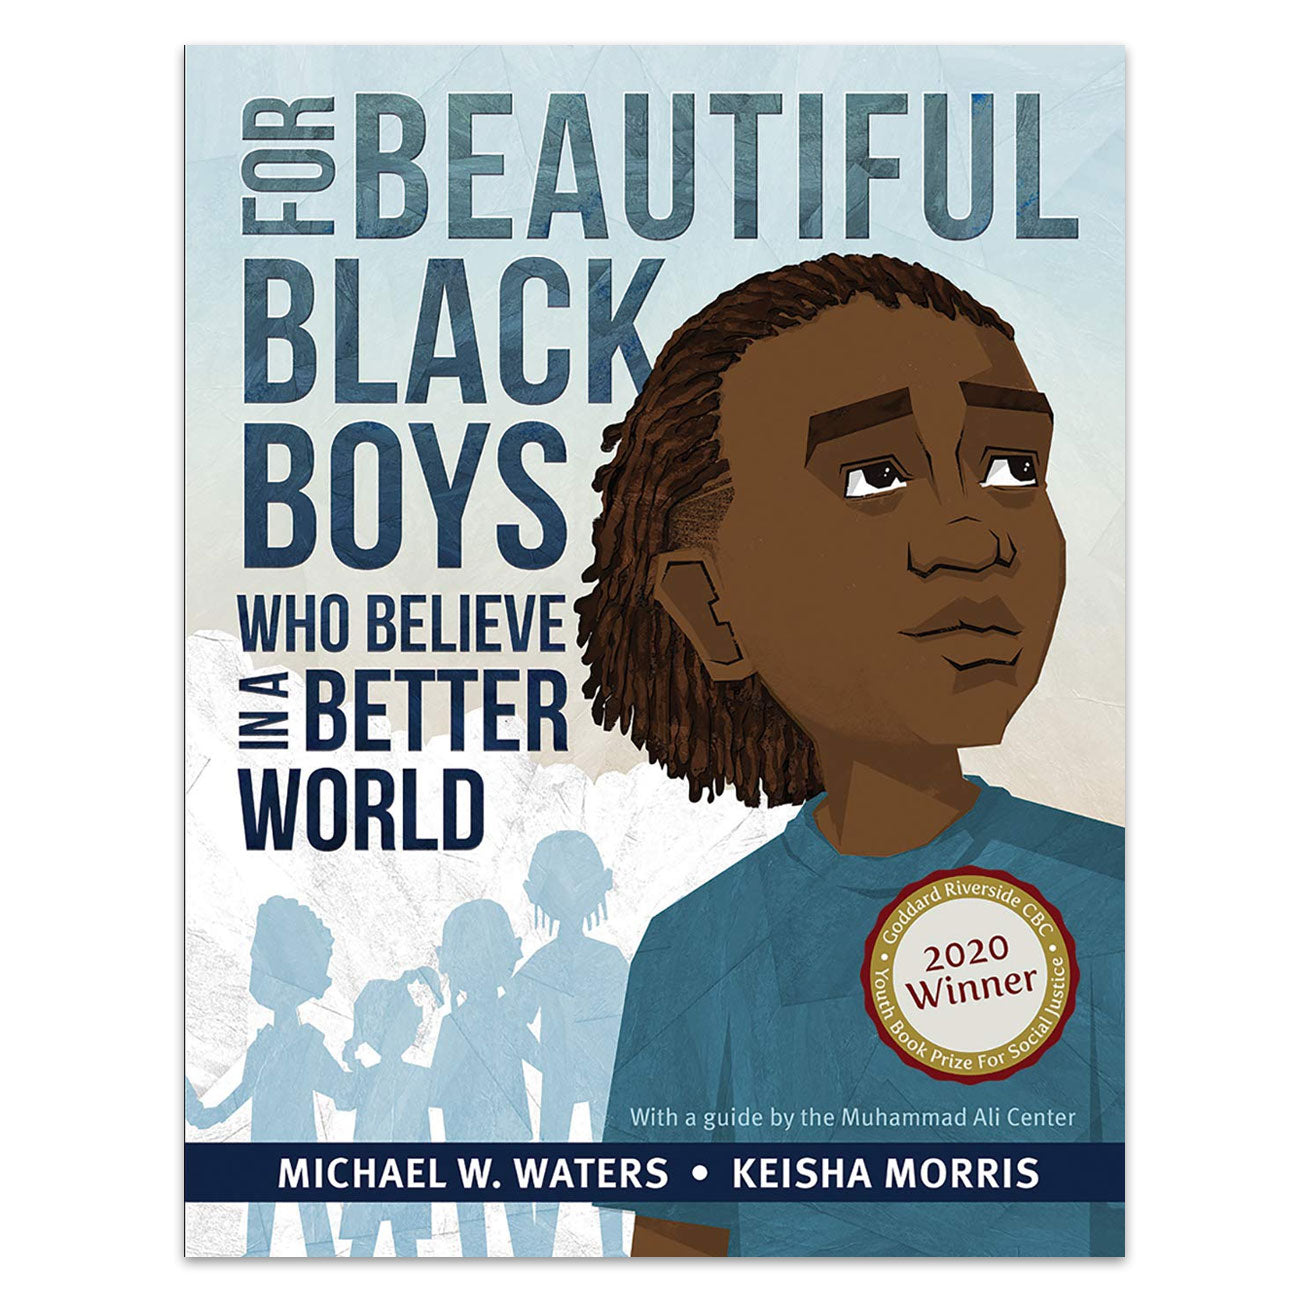 For Beautiful Black Boys Who Believe in a Better World - Hardcover Book